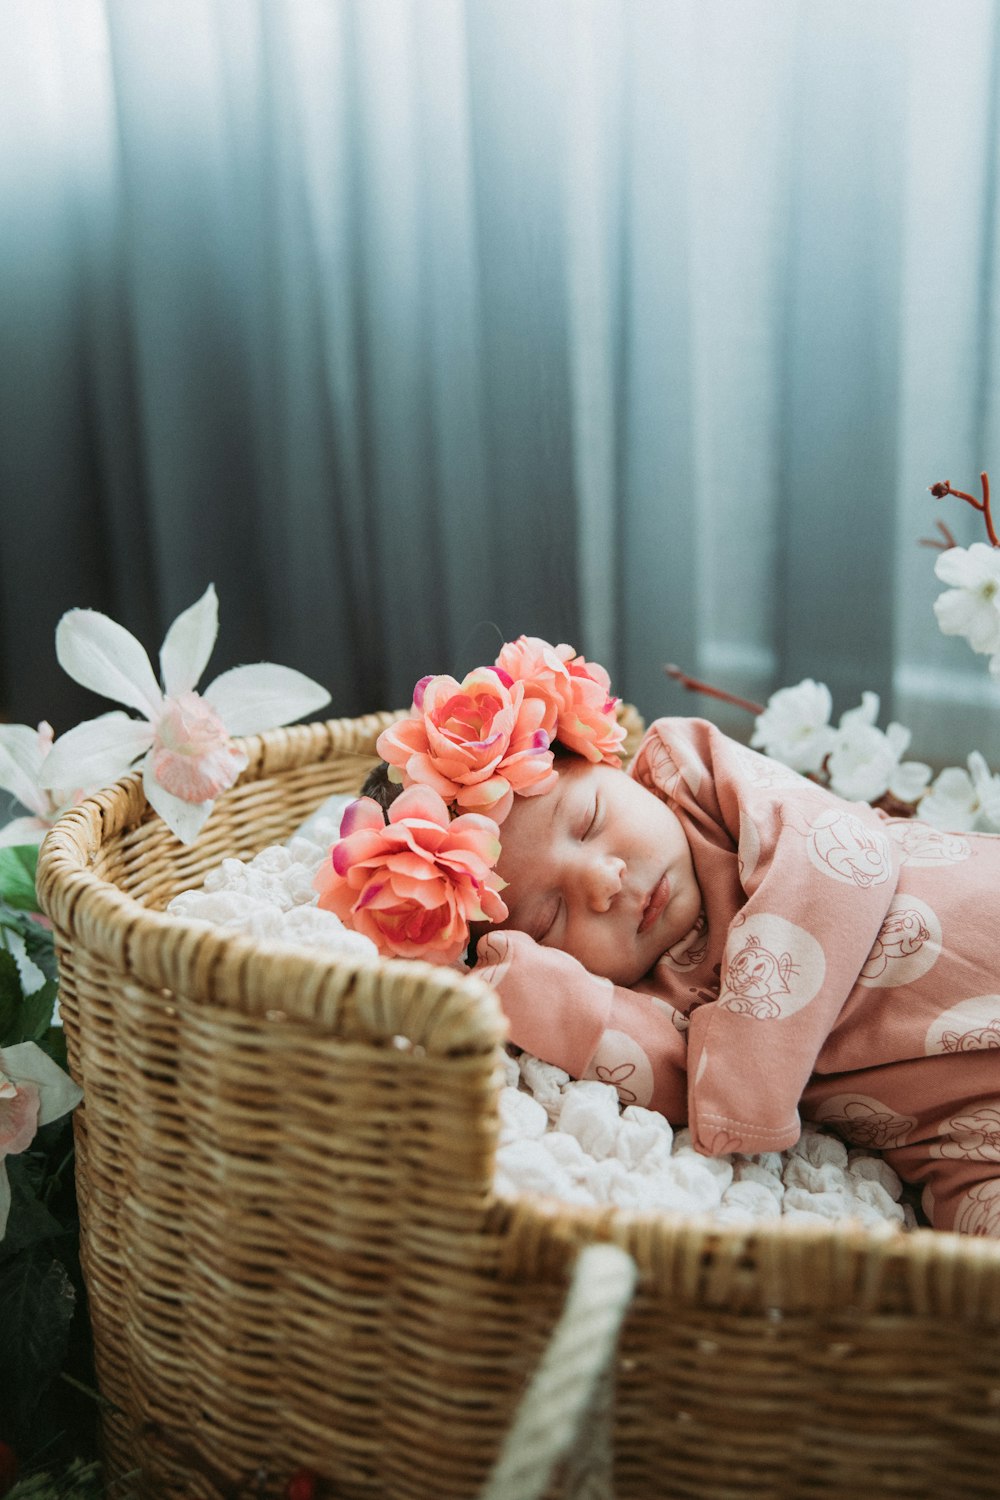 a baby is sleeping in a basket with flowers